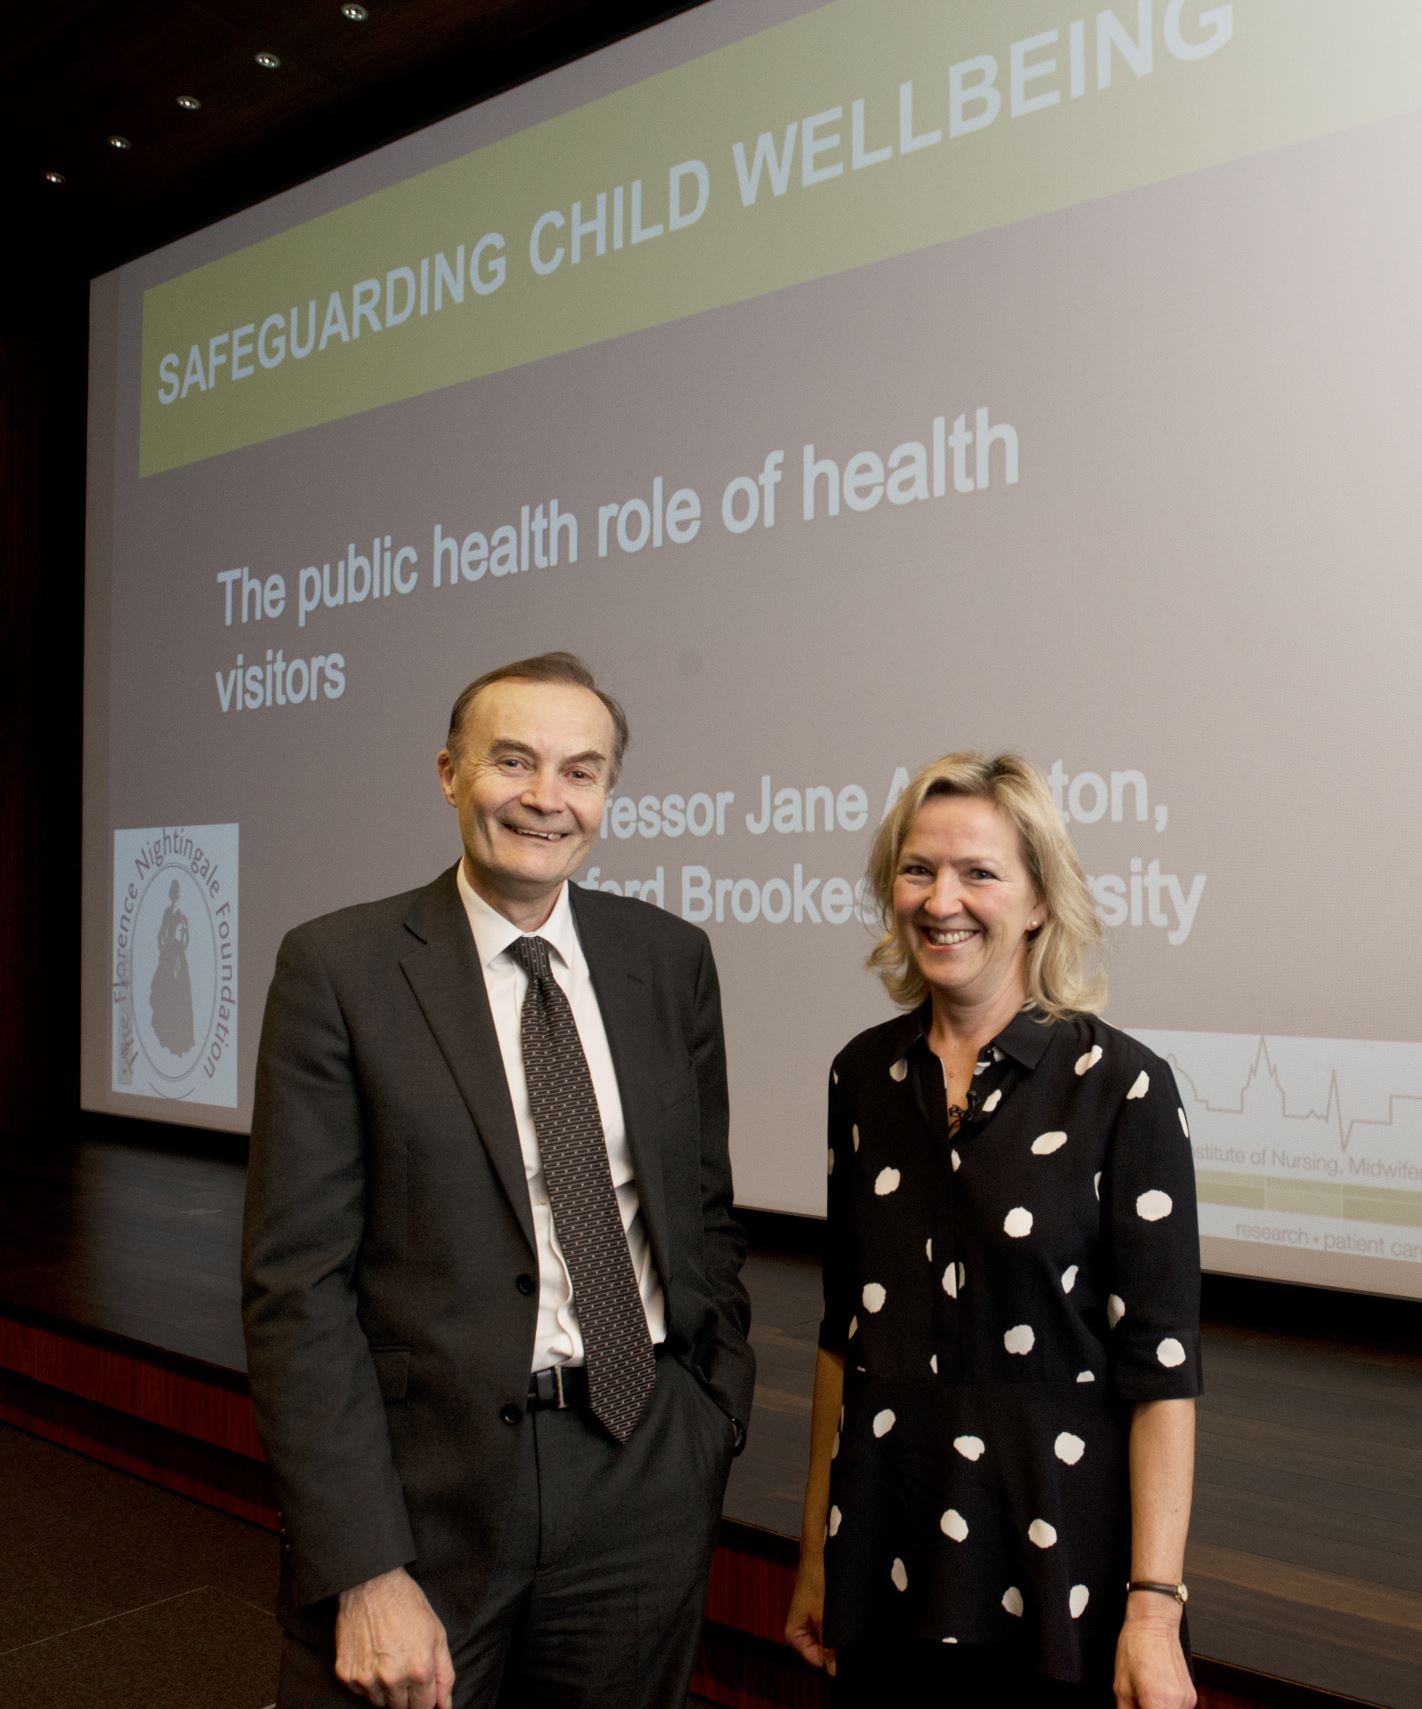 Professor Jane Appleton with Professor David Evans (the Assistant Director for Research and Knowledge Transfer) who hosted the lecture